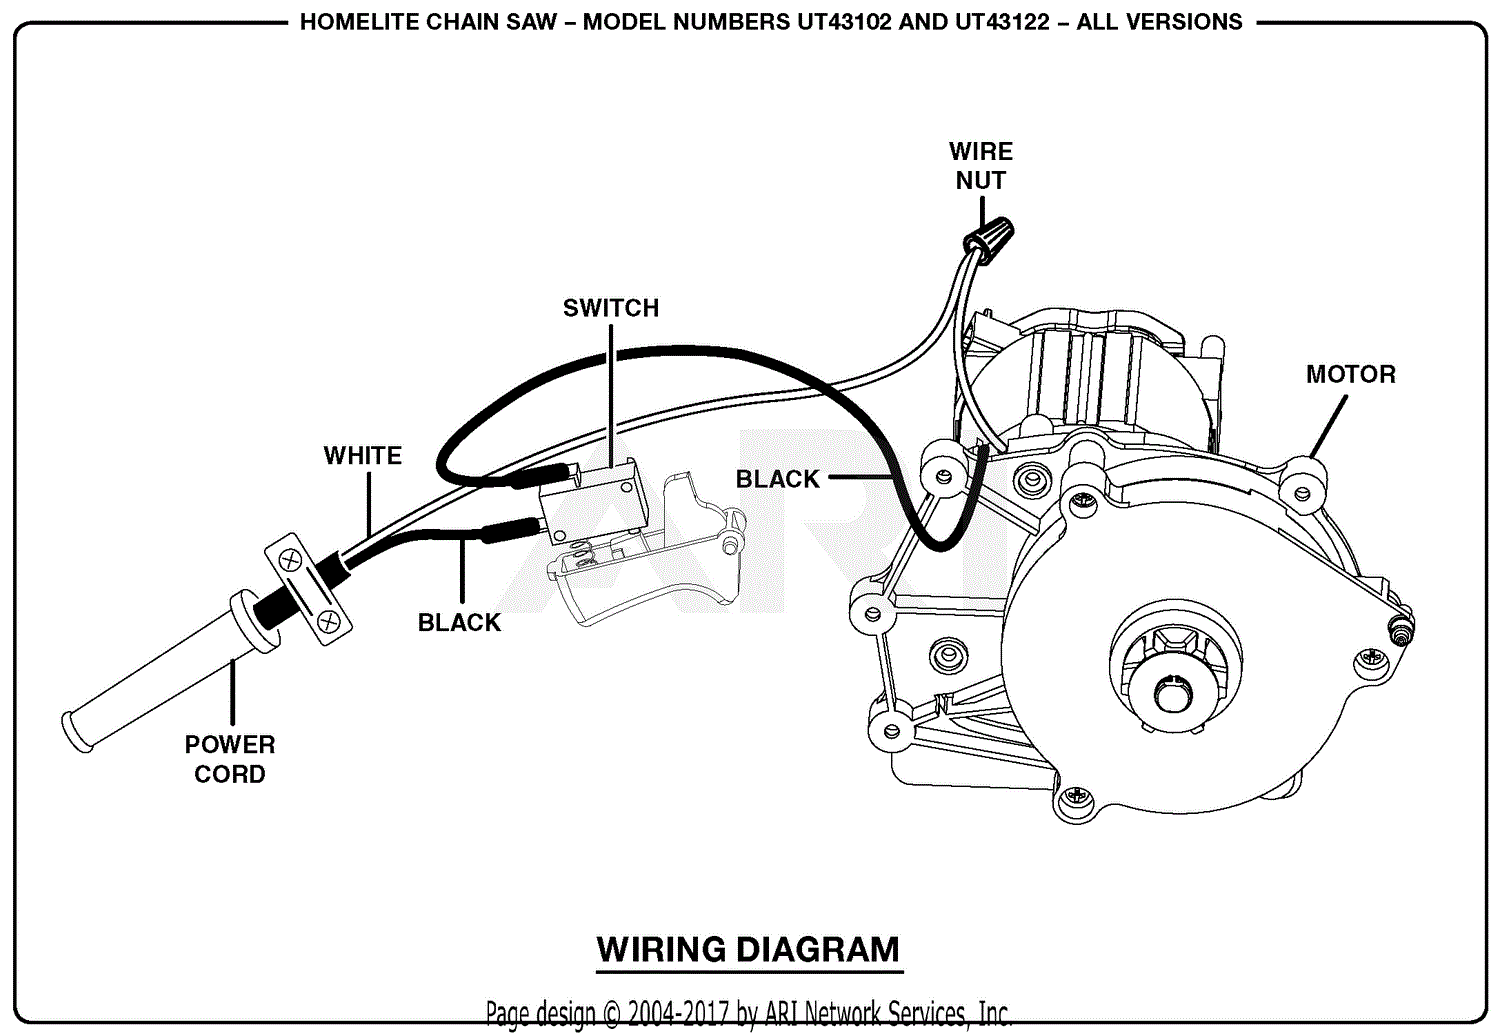 Diagram Craftsman Chainsaw Wiring Diagram Free Picture Full Version Hd Quality Free Picture Wiring5less Radiostudiouno It